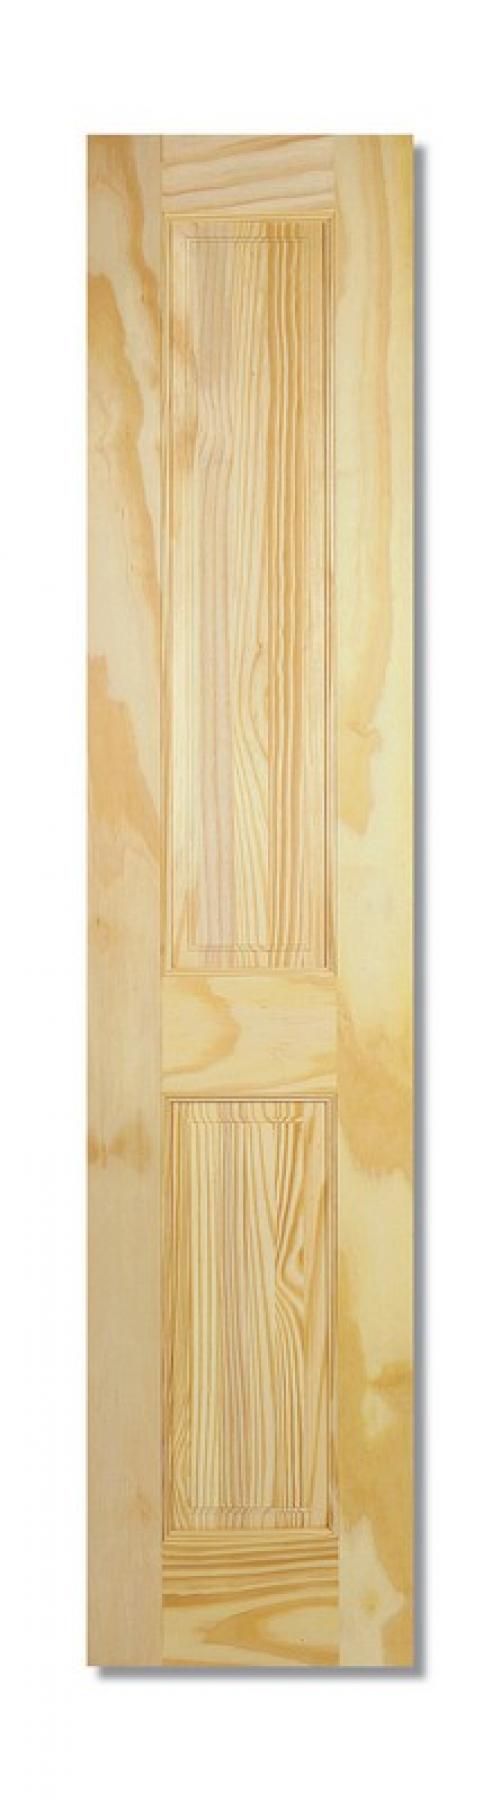 Image for 80X32 4 PANEL CLEAR PINE